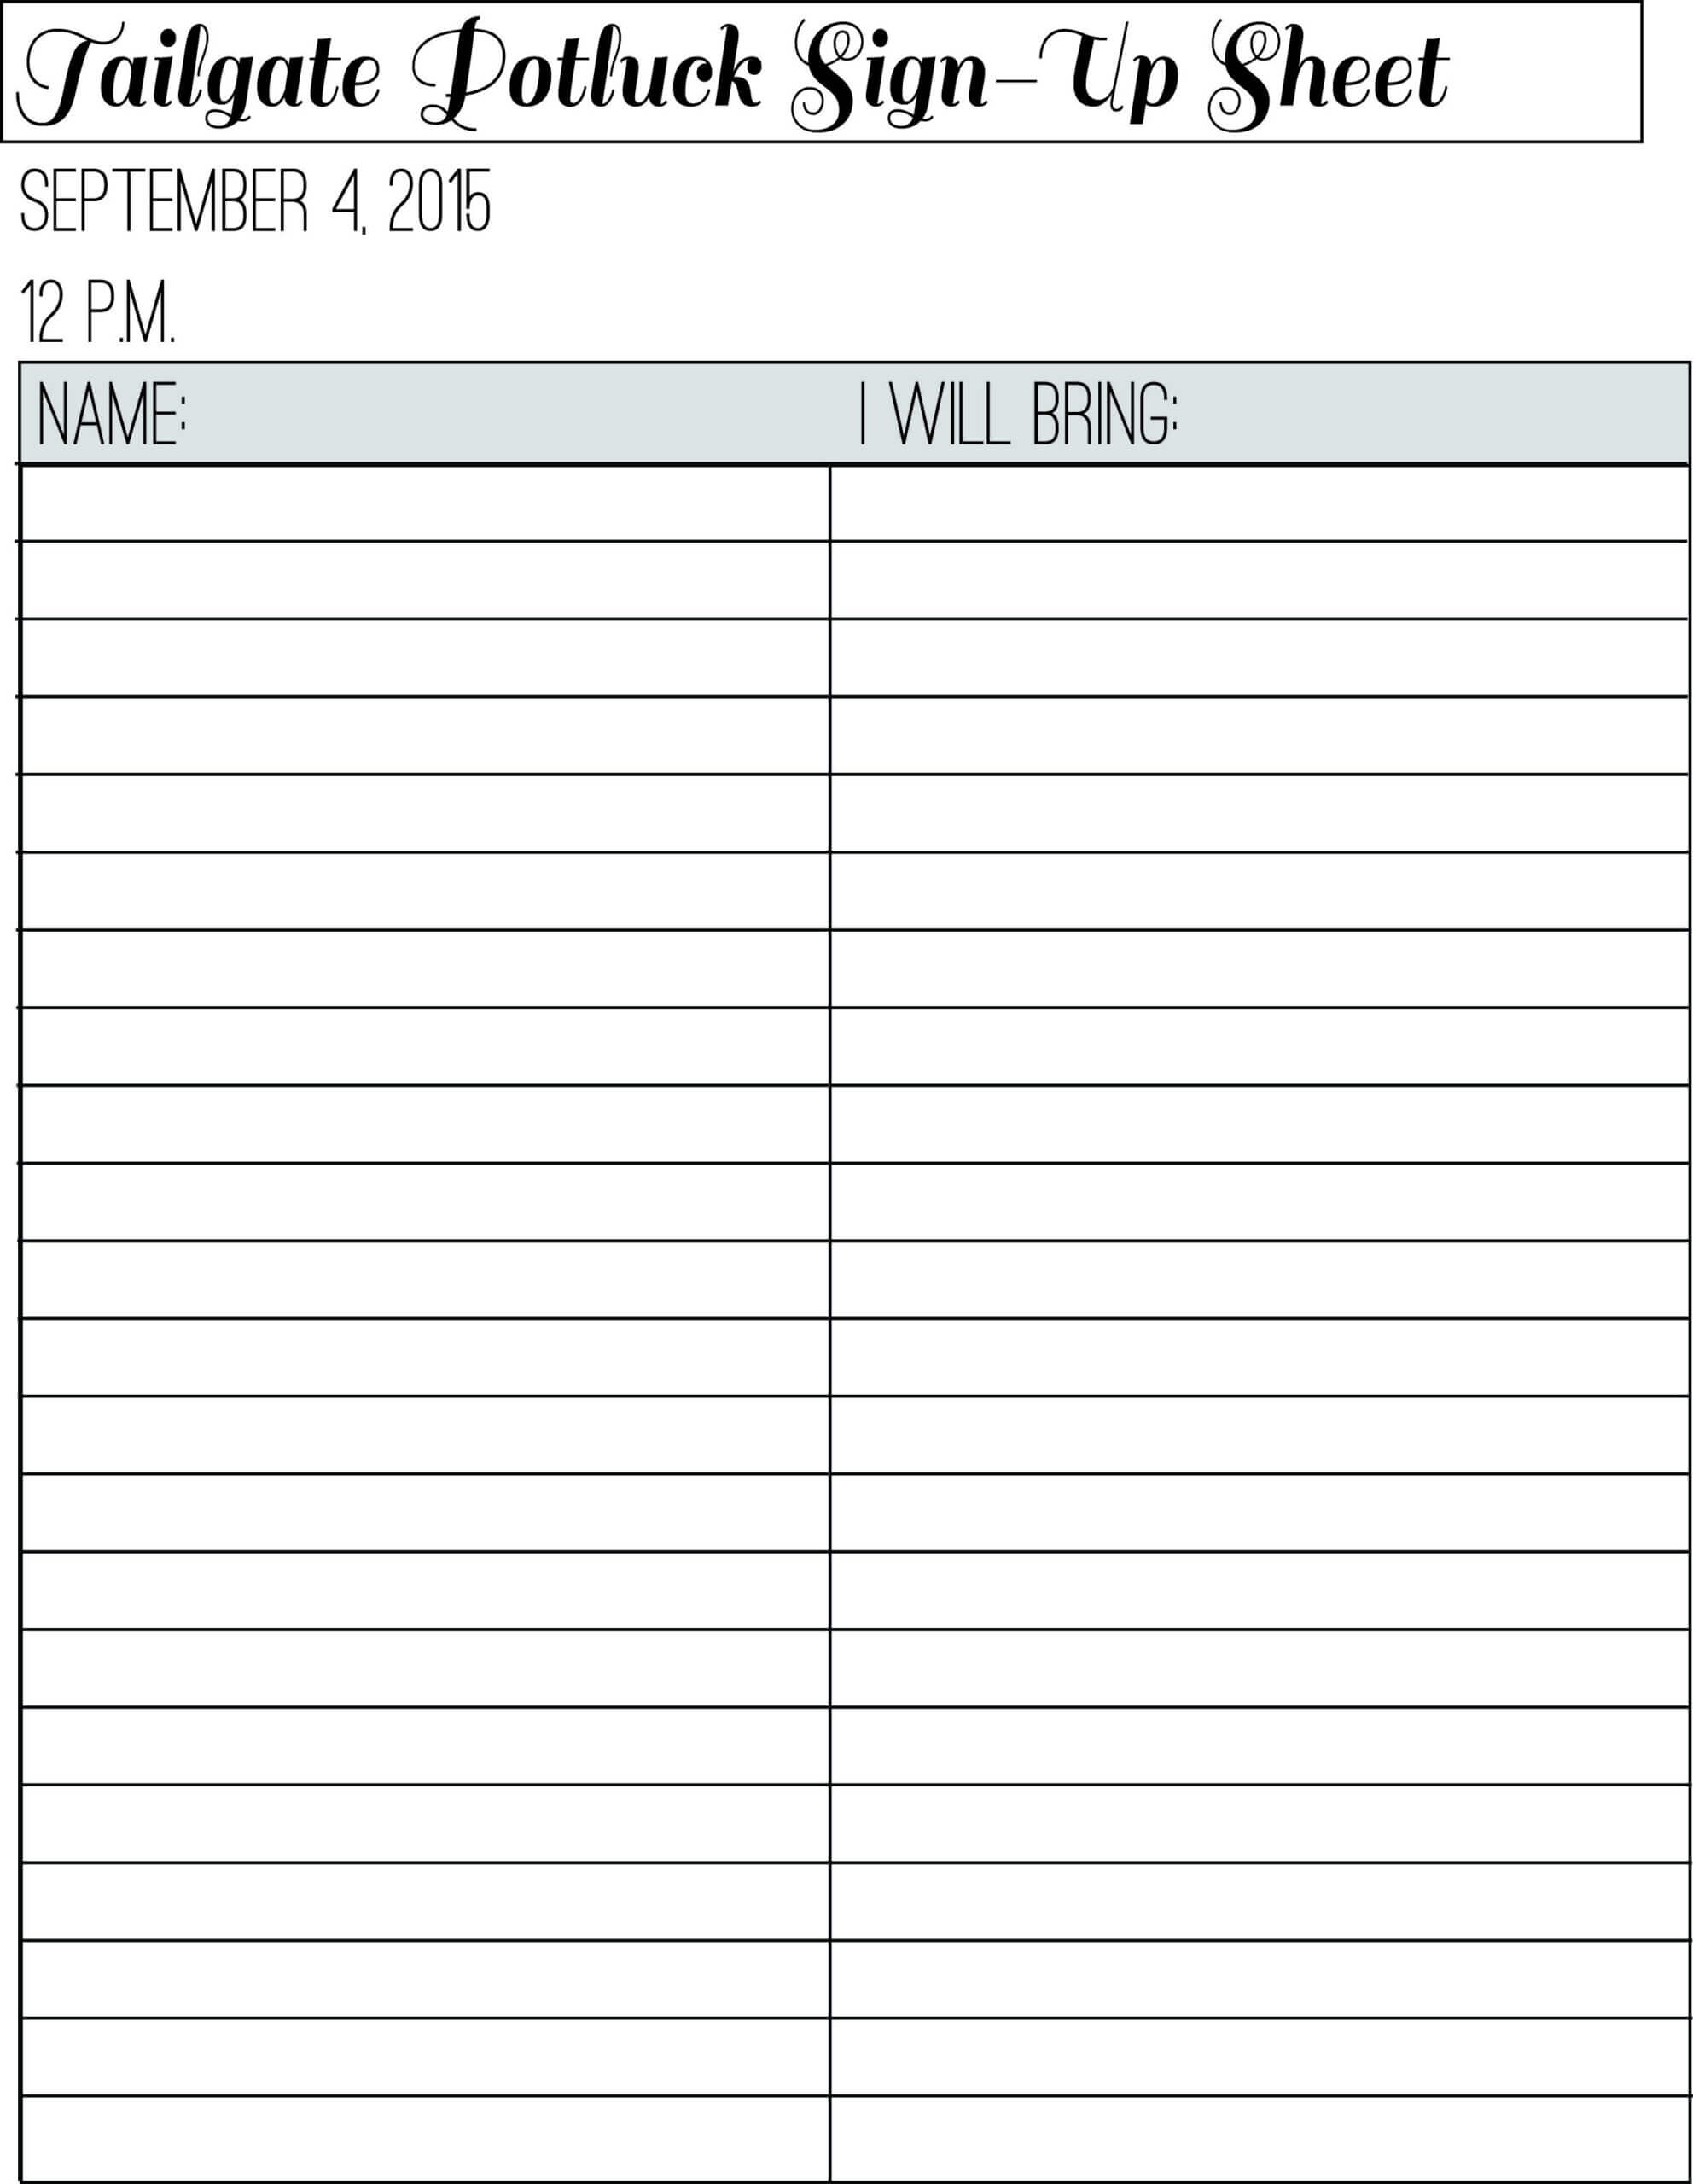 The Sign Up Sheet For Our Tailgate Potluck. | Office Potluck Regarding Potluck Signup Sheet Template Word